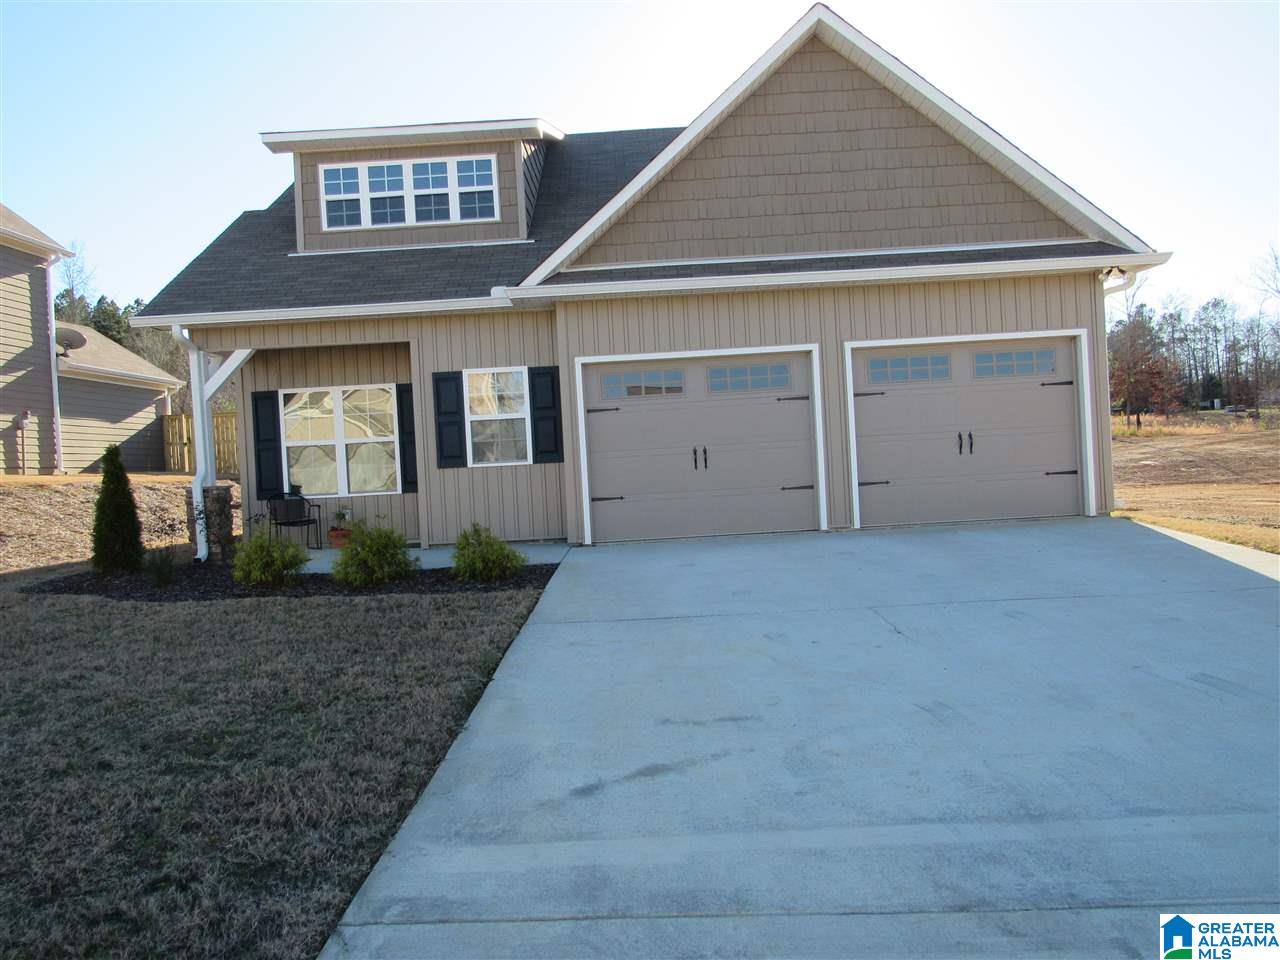 871072 1 Open Houses for Feb. 7-9 from McCalla to Odenville and in between